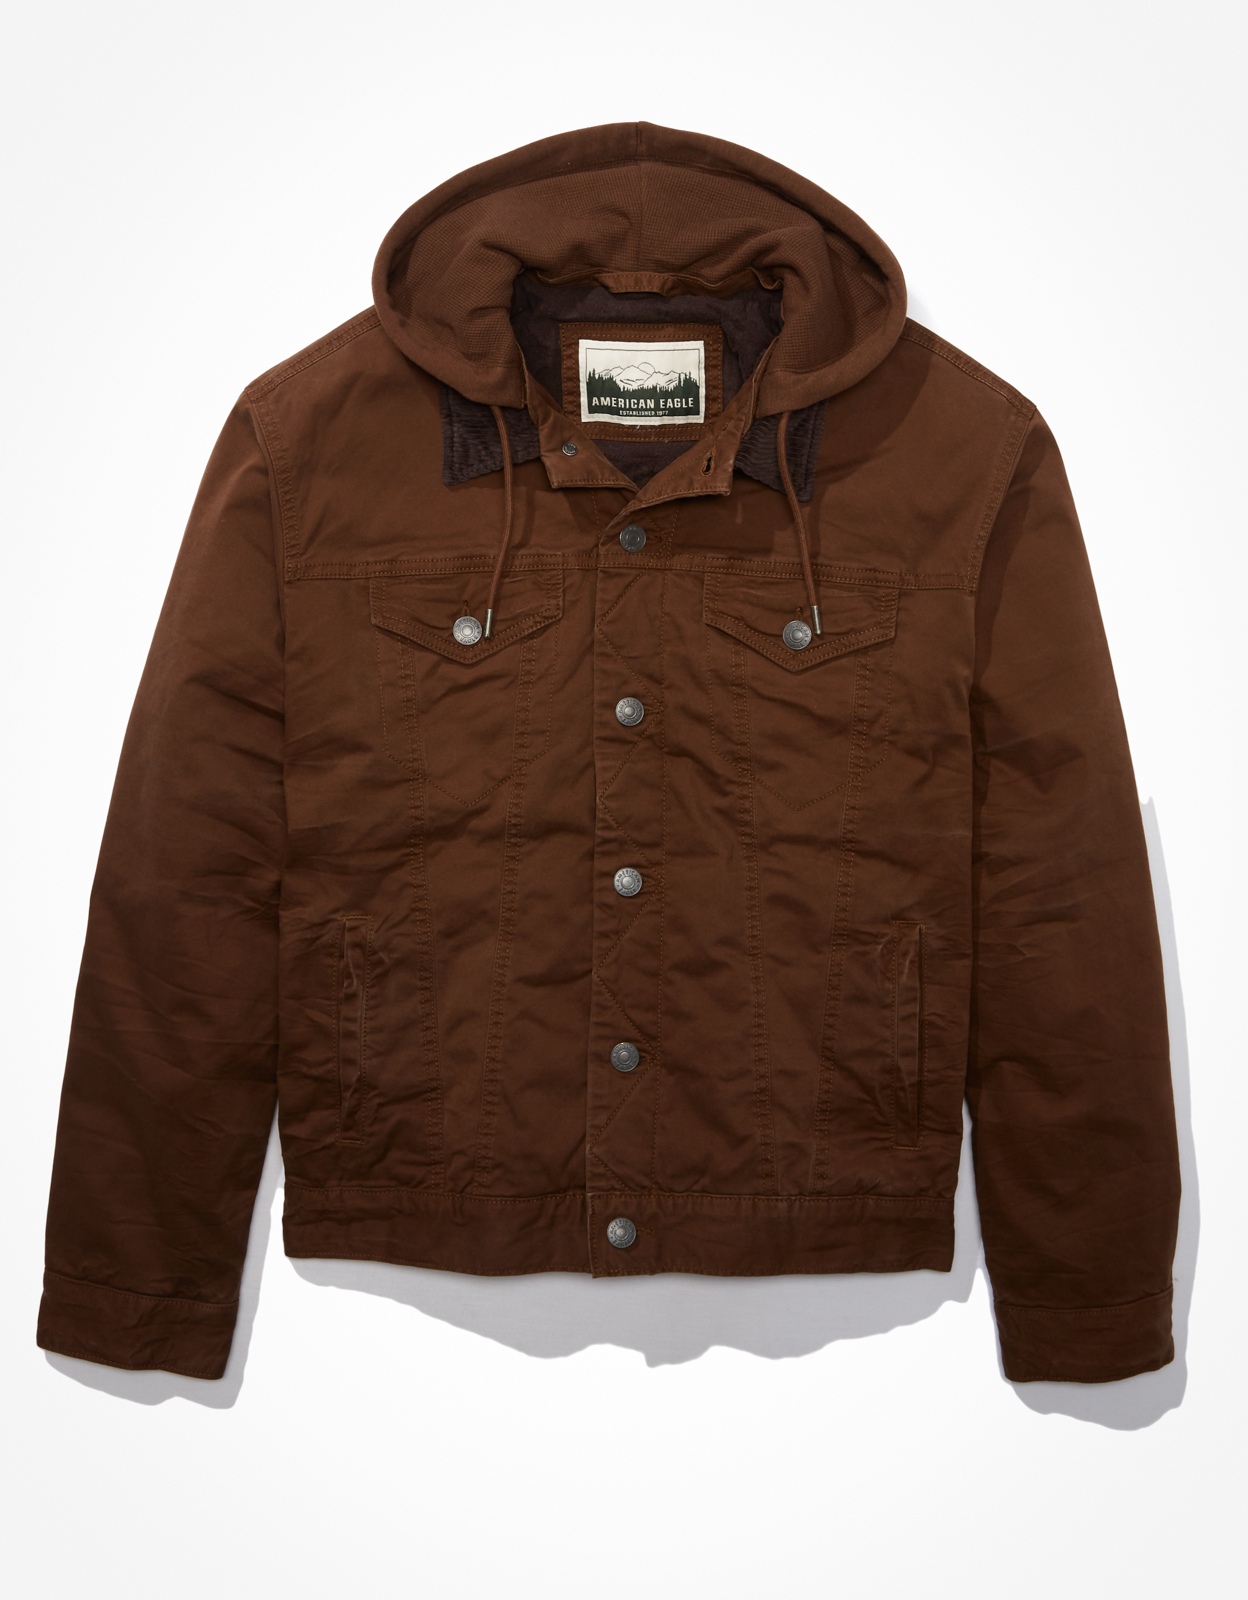 Shop AE Hooded Twill Jacket online | American Eagle Outfitters